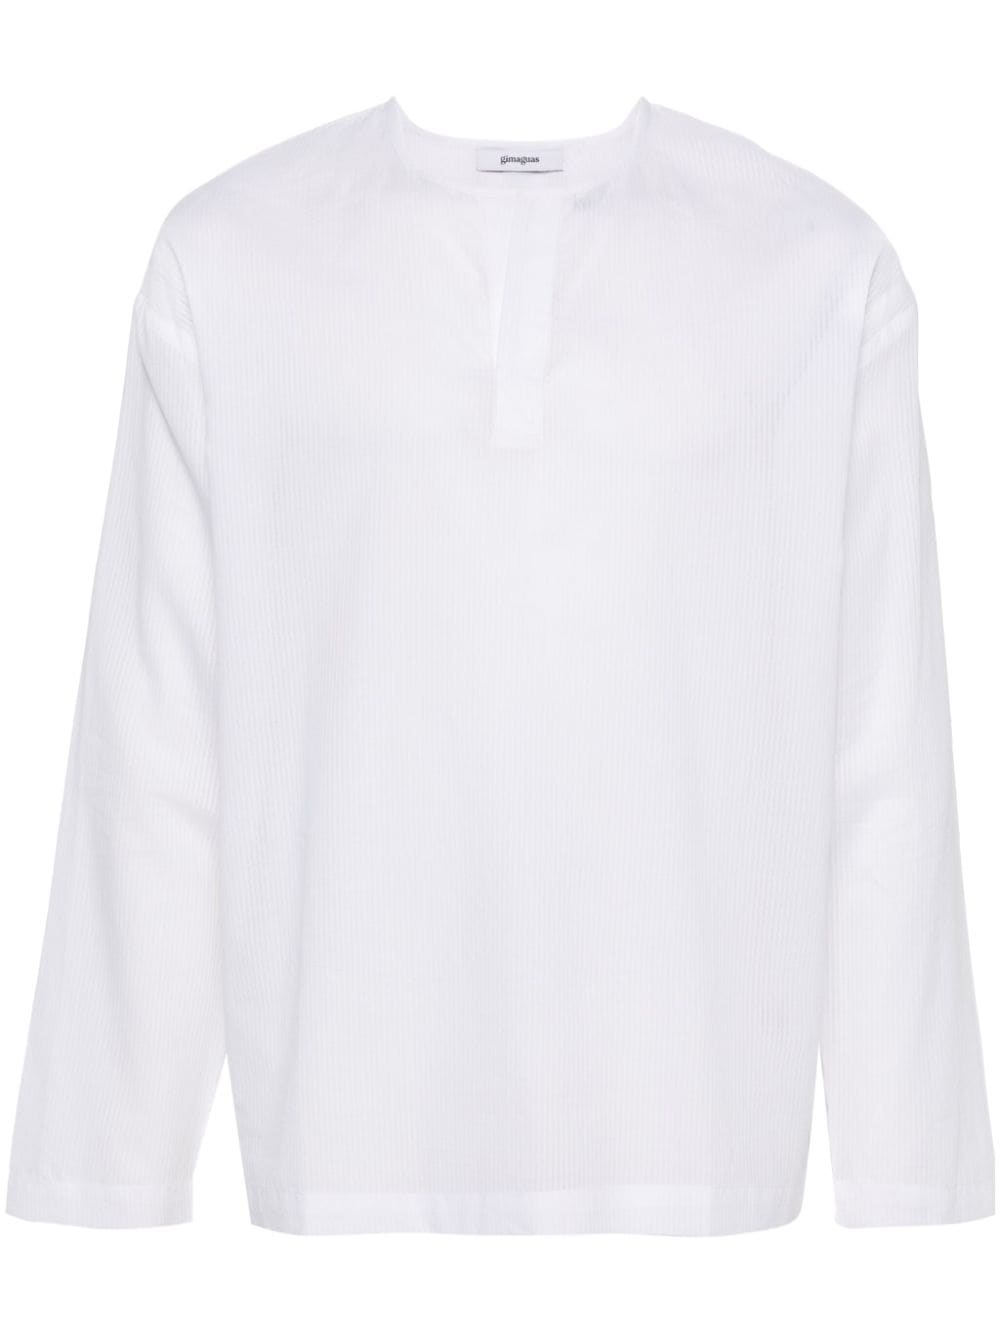 Gimaguas Cotton Stripped Shirt In White